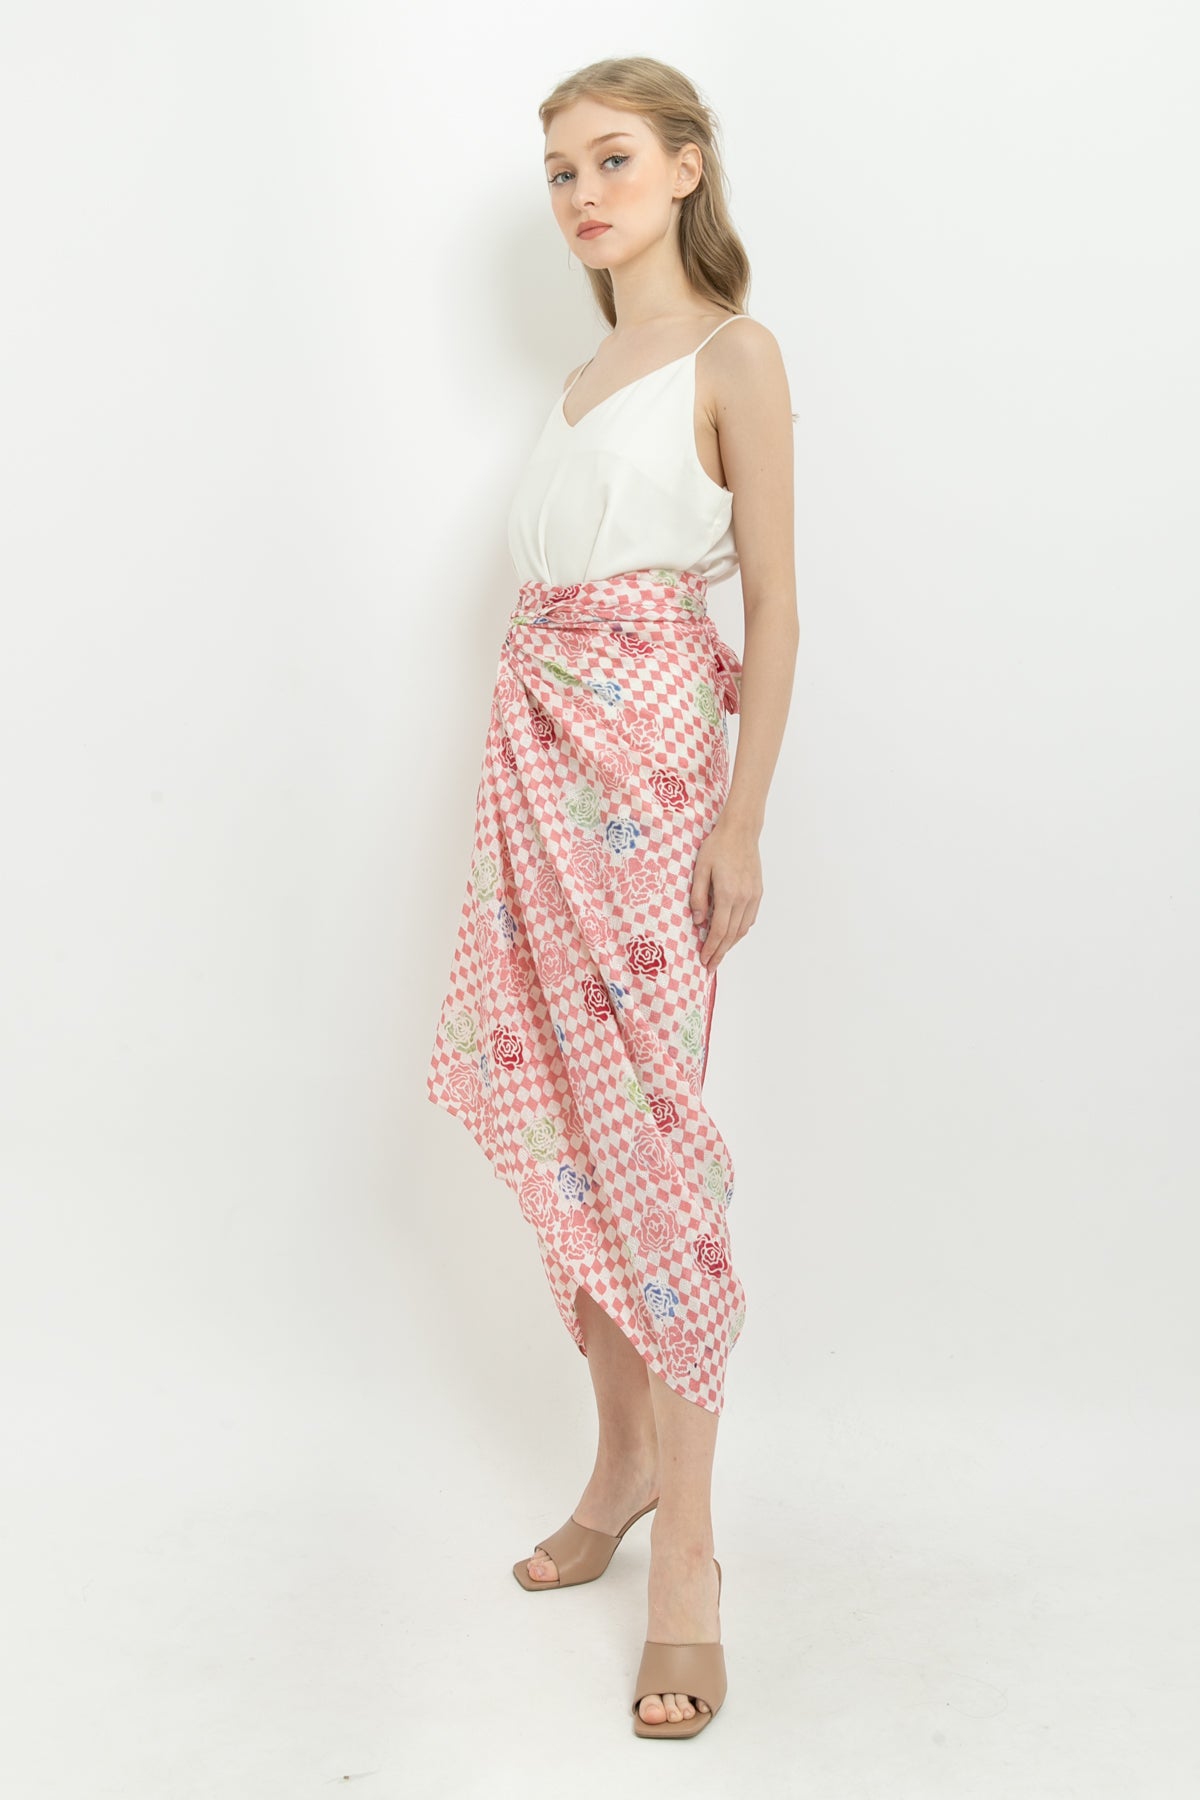 Lilit Skirt in Checkered Pink